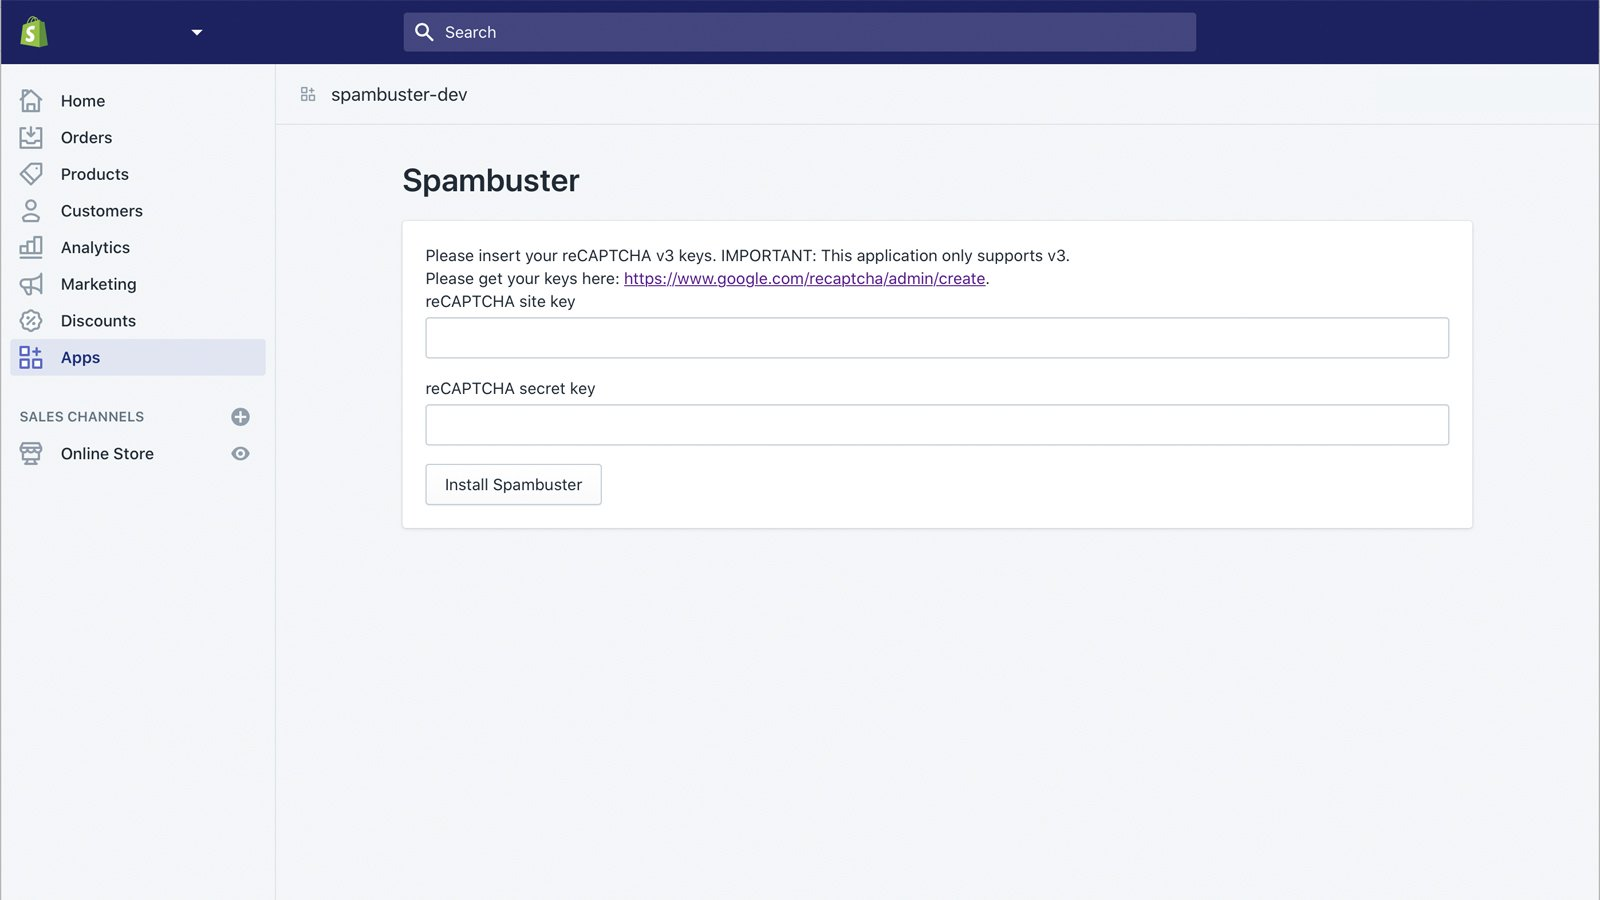 screenshot of spambuster app on Shopify